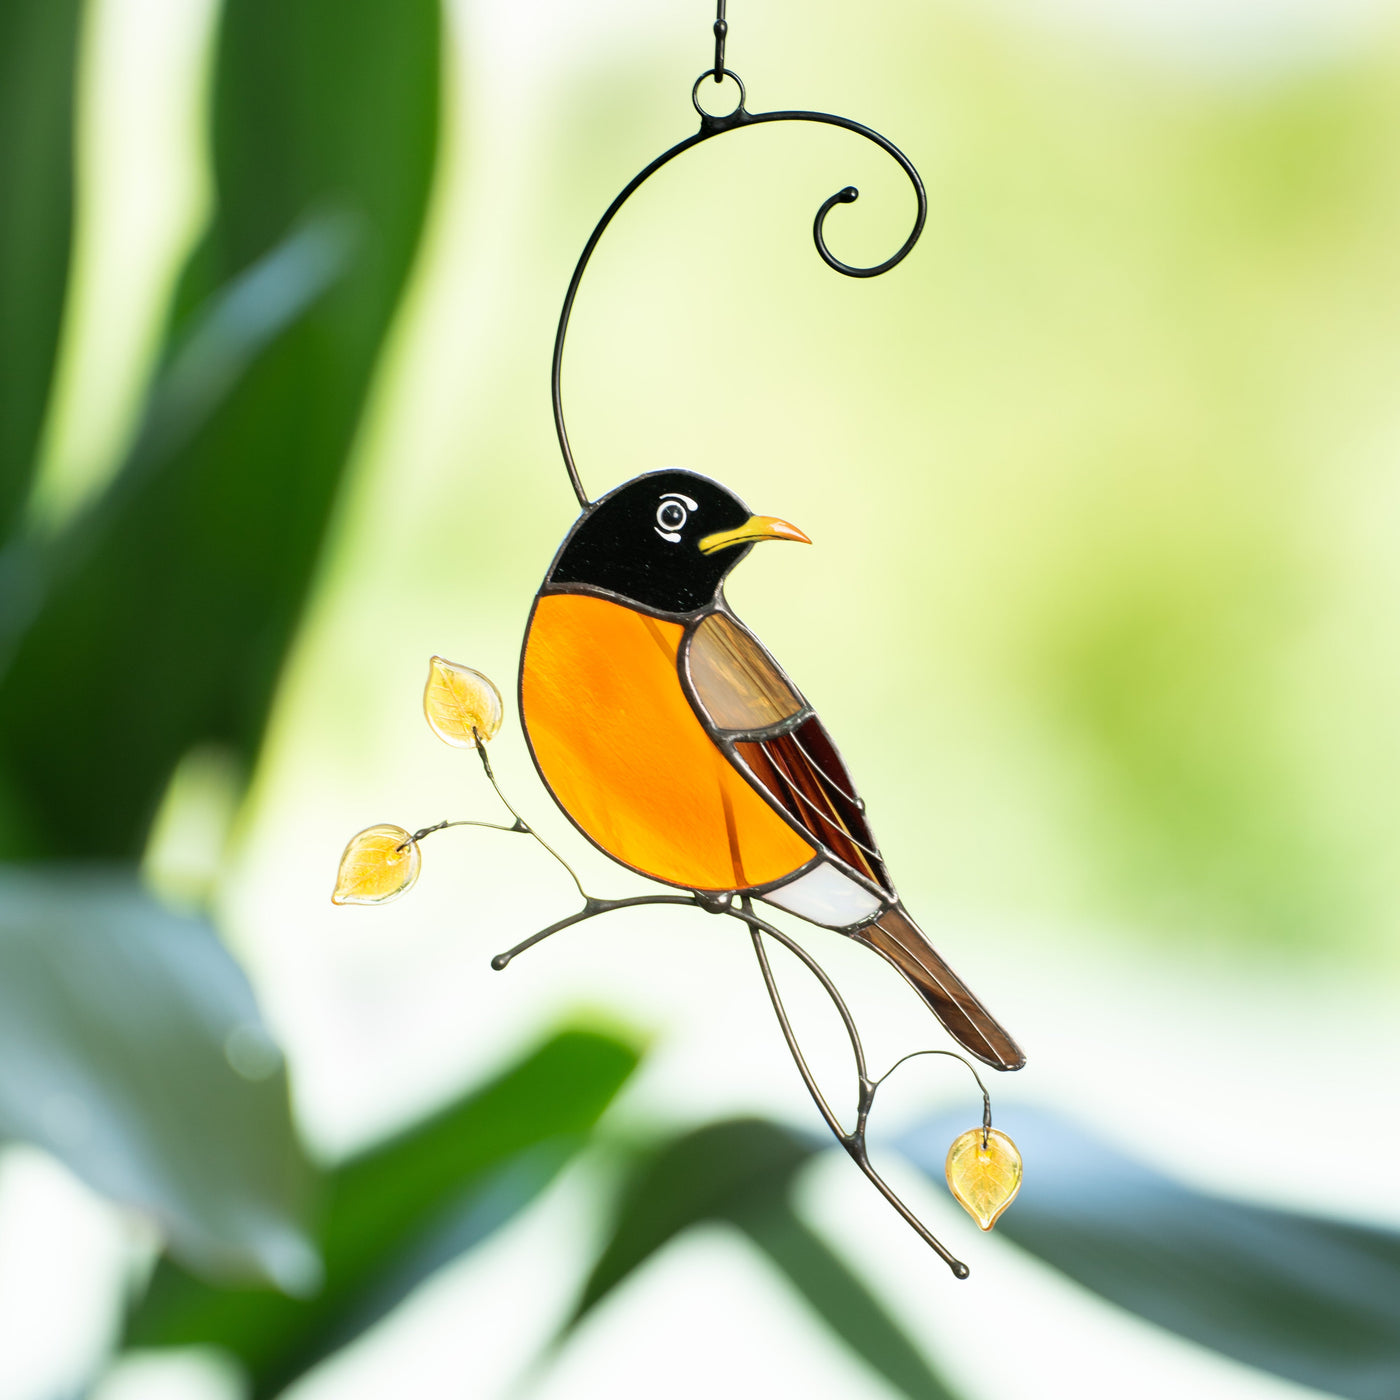 Stained glass suncatcher of a looking right Baltimore oriole sitting on the branch with yellow leaves